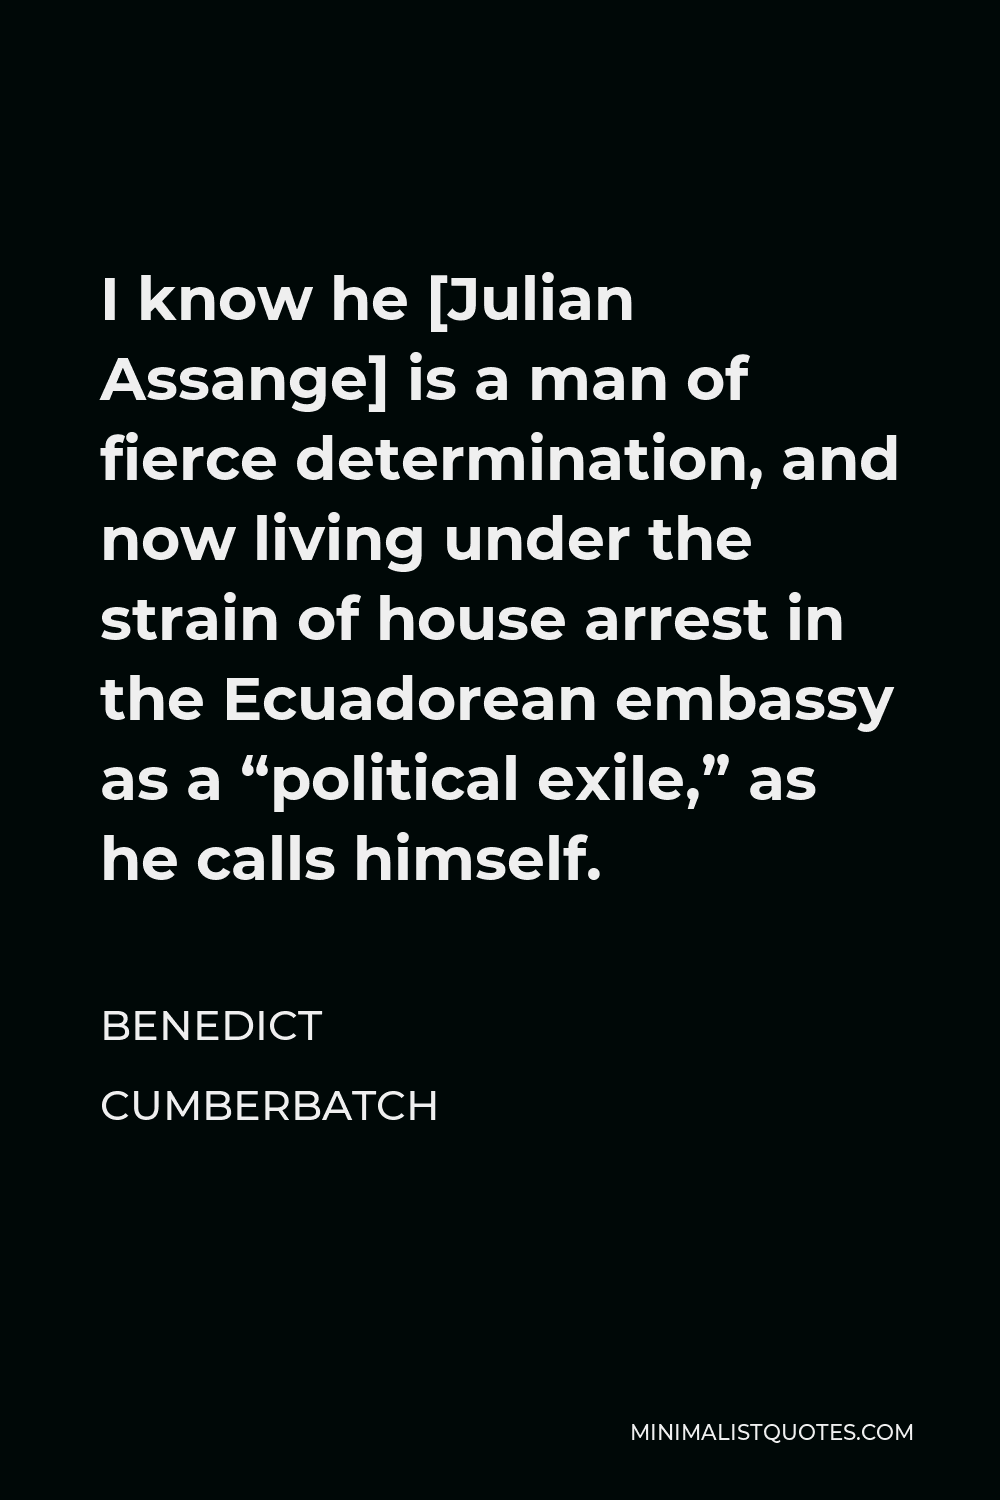 Benedict Cumberbatch Quote - I know he [Julian Assange] is a man of fierce determination, and now living under the strain of house arrest in the Ecuadorean embassy as a “political exile,” as he calls himself.